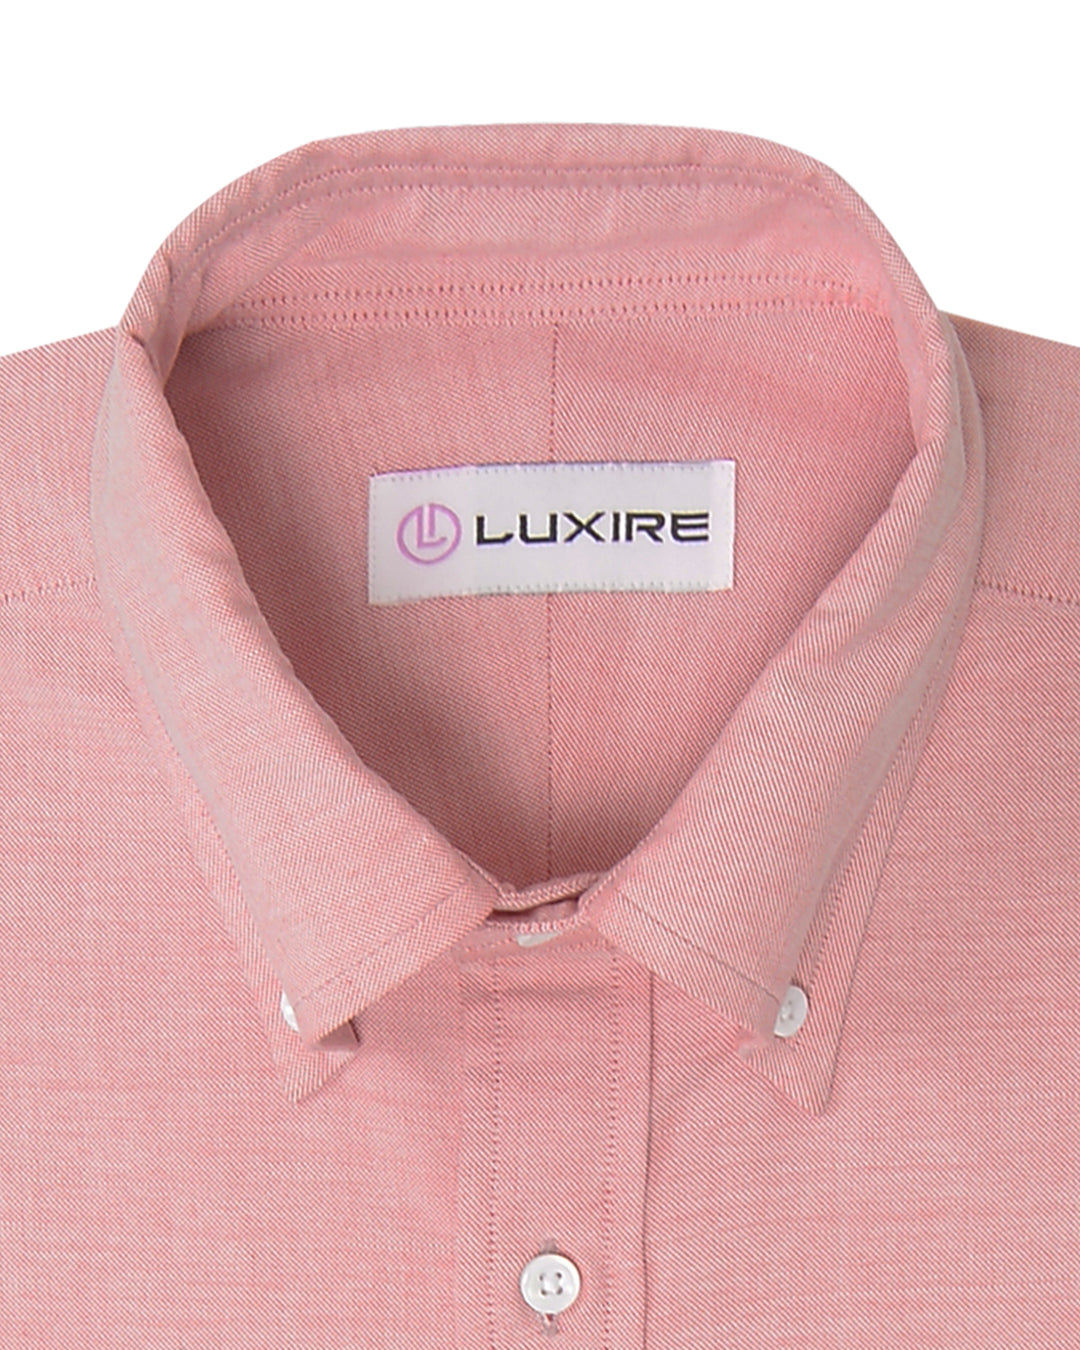 Collar of the custom oxford shirt for men by Luxire in red on white